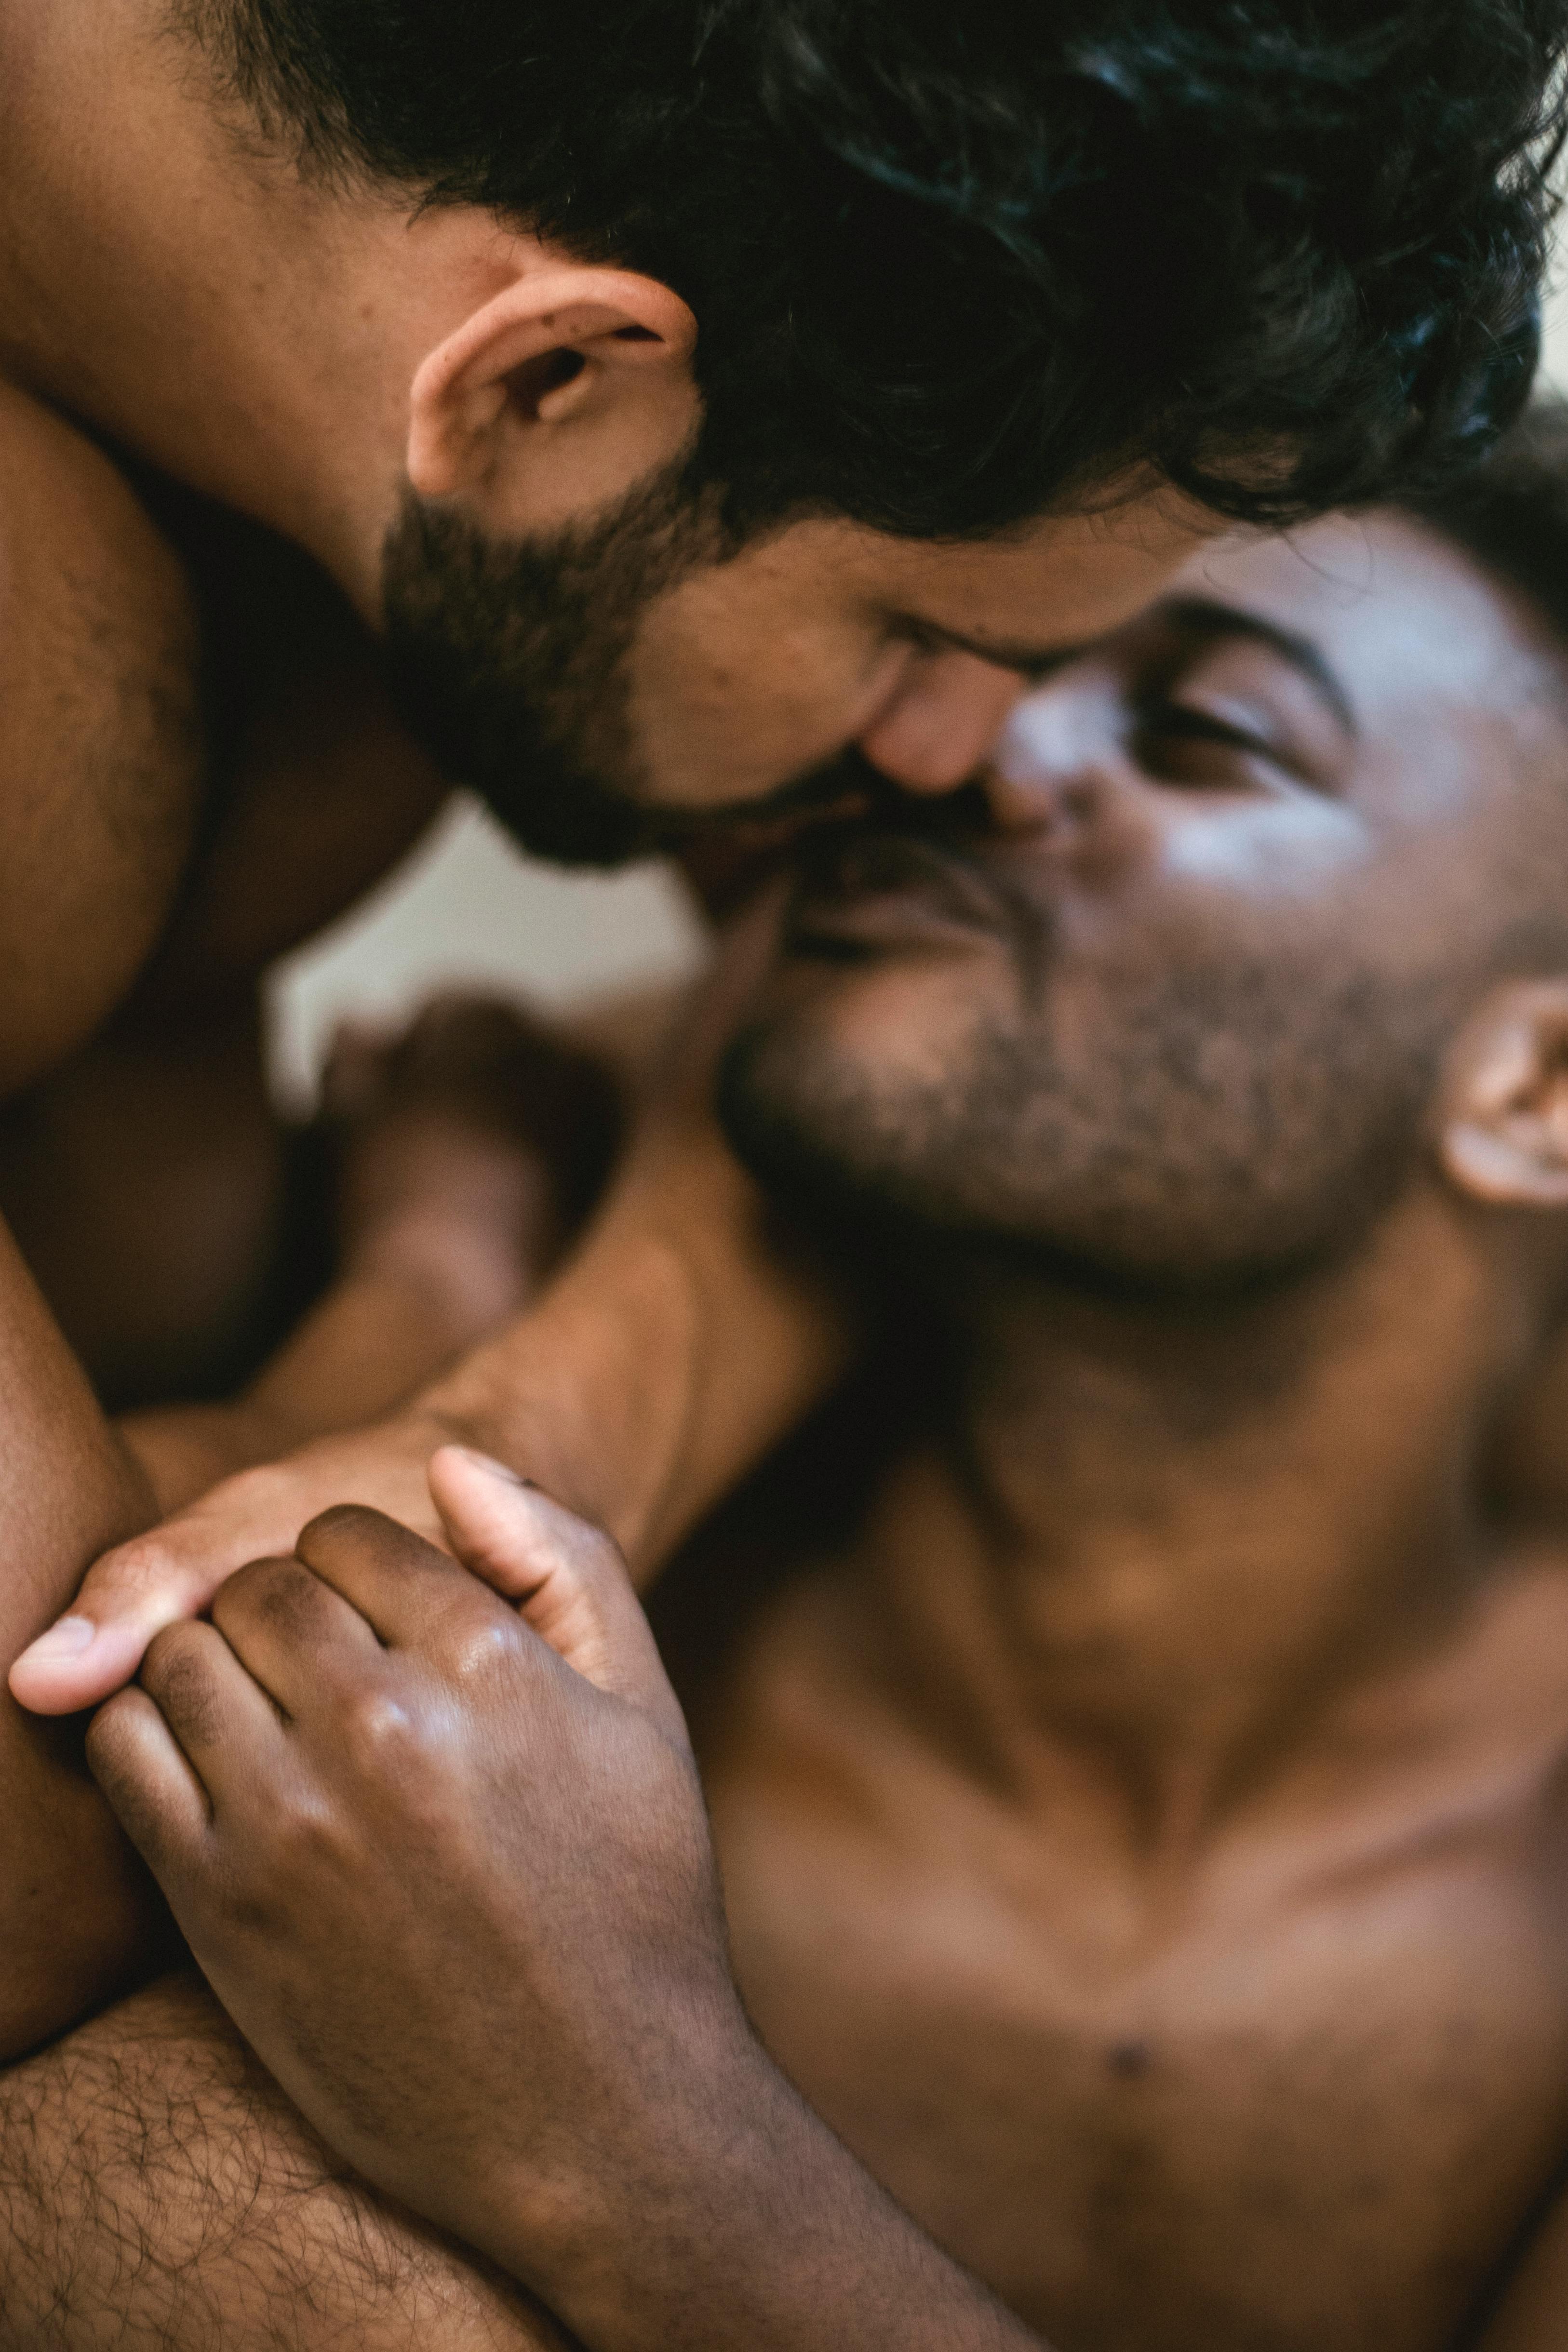 two men kissing and holding hands